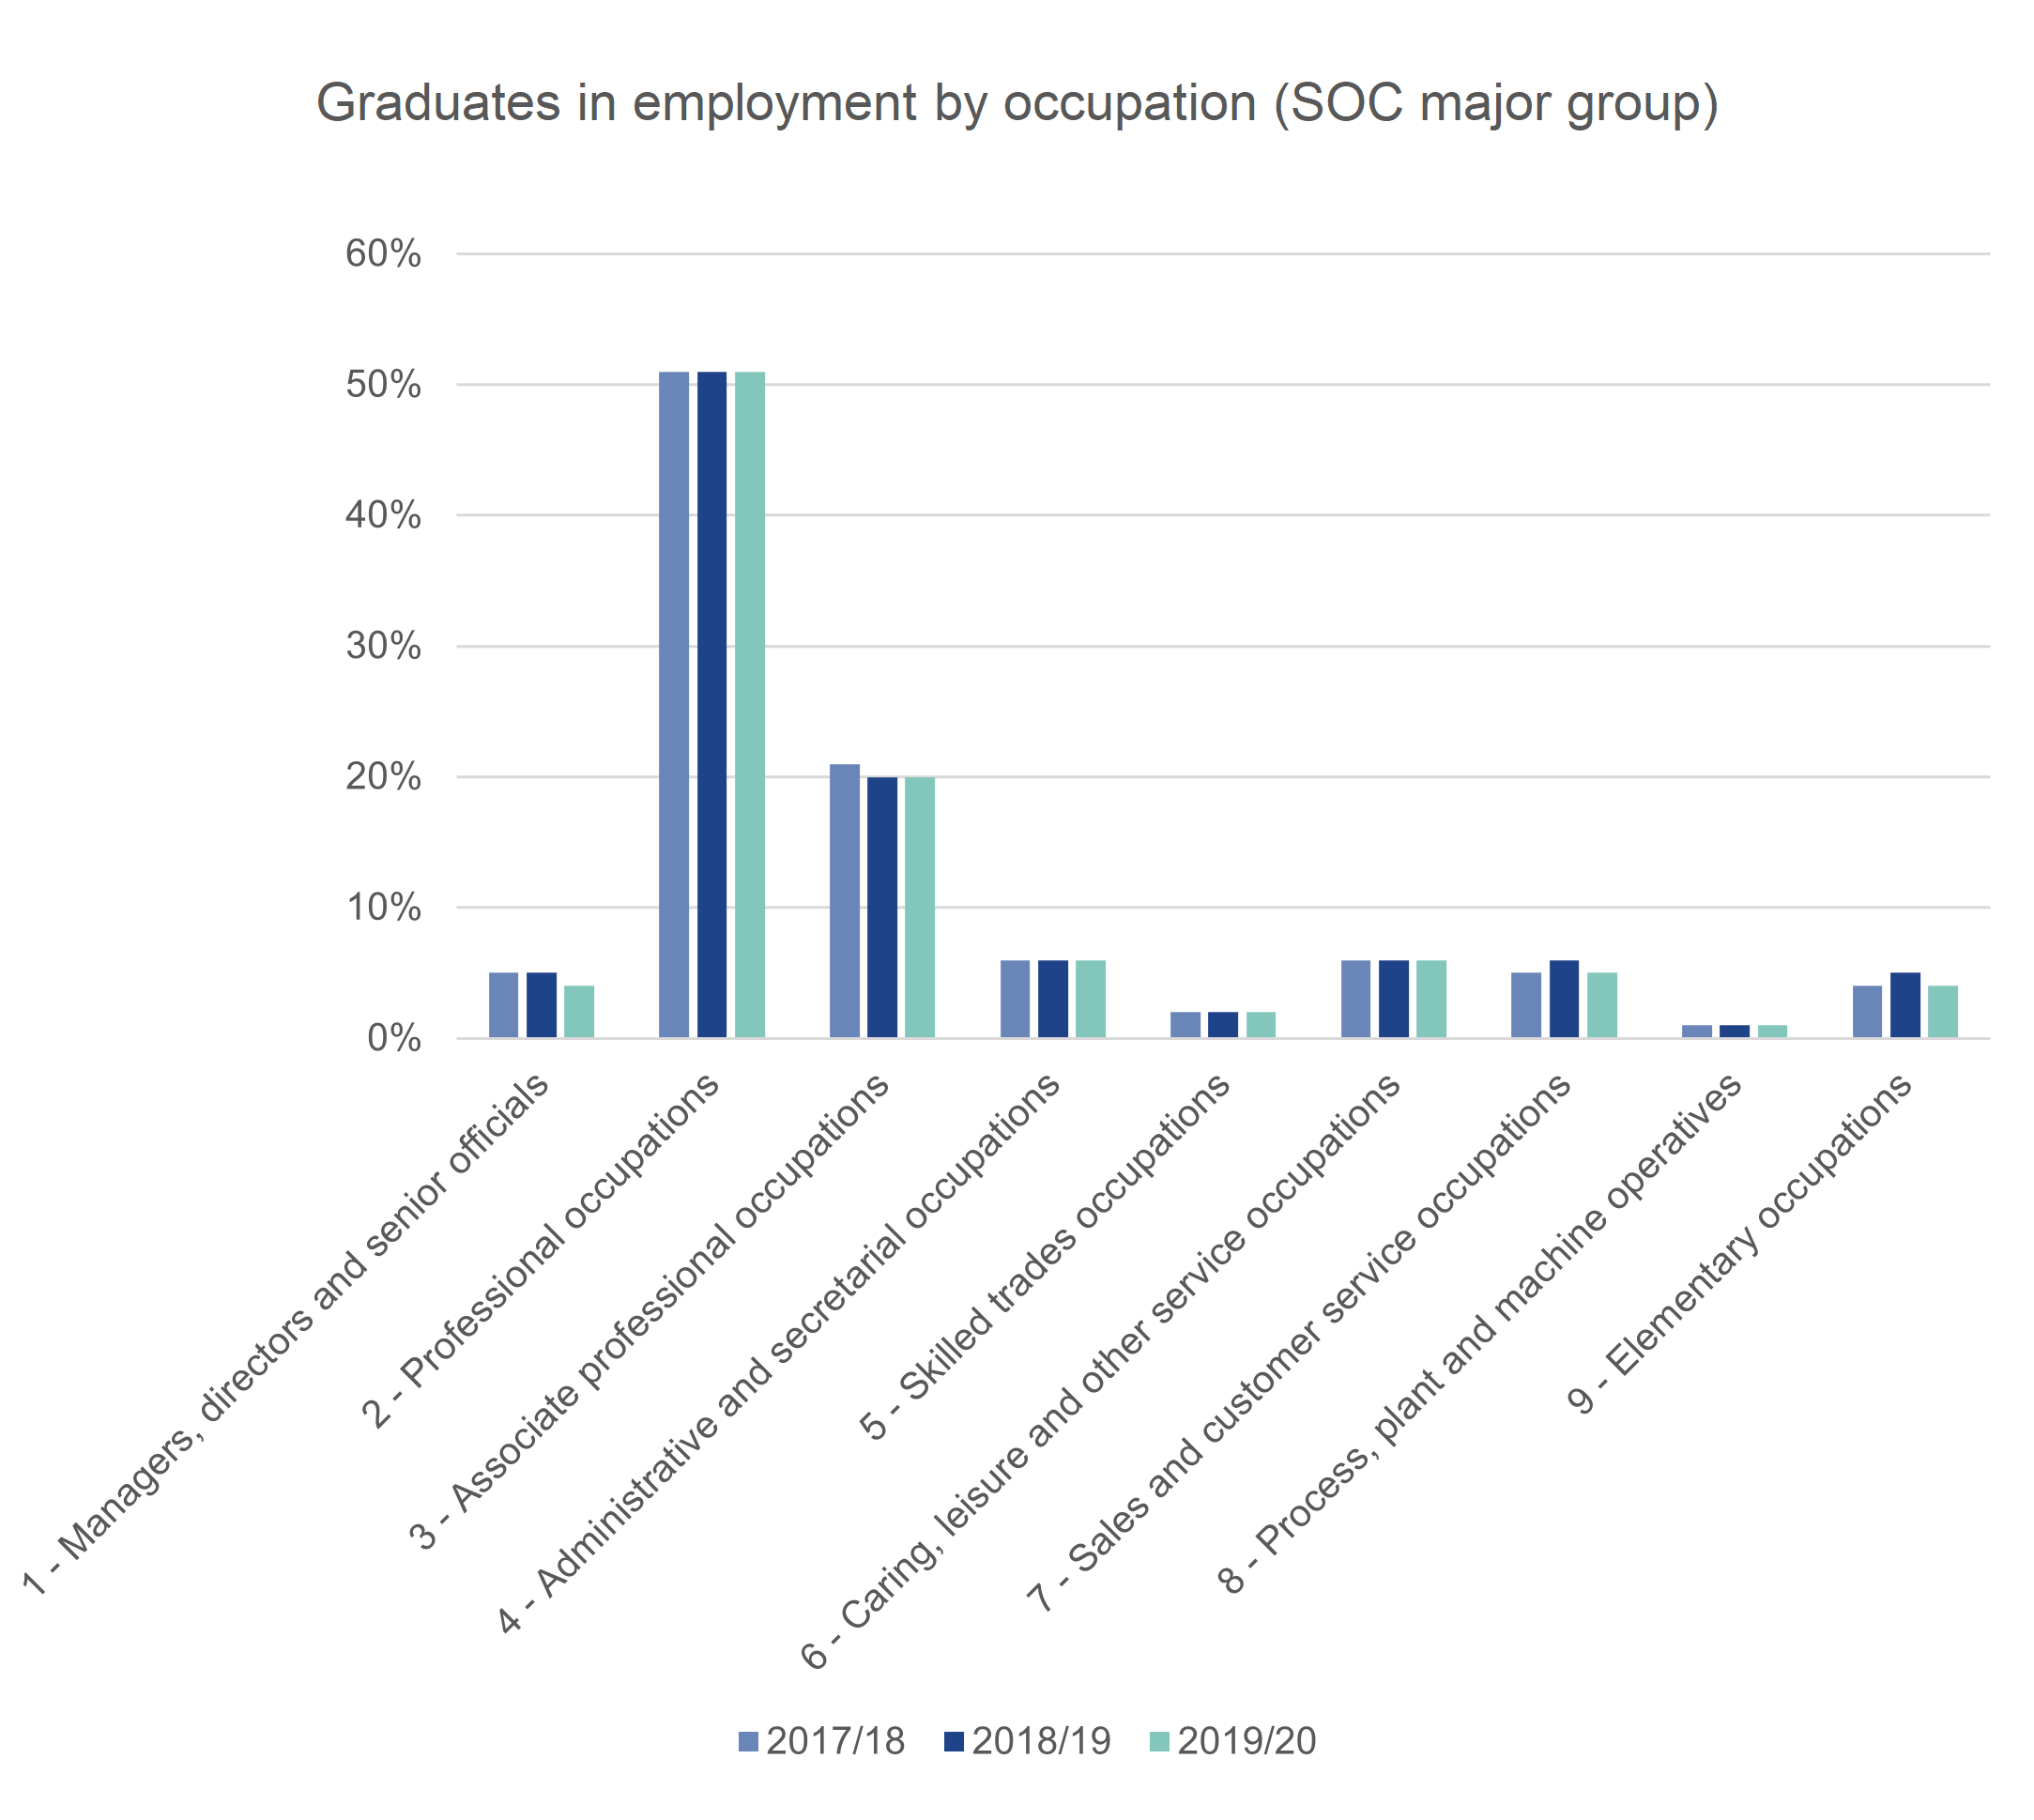 In all years of Graduate Outcomes over 50% of employed graduates were in SOC group 2 (professional occupations) and over 20% in SOC group 3 (Associate professional occupations)